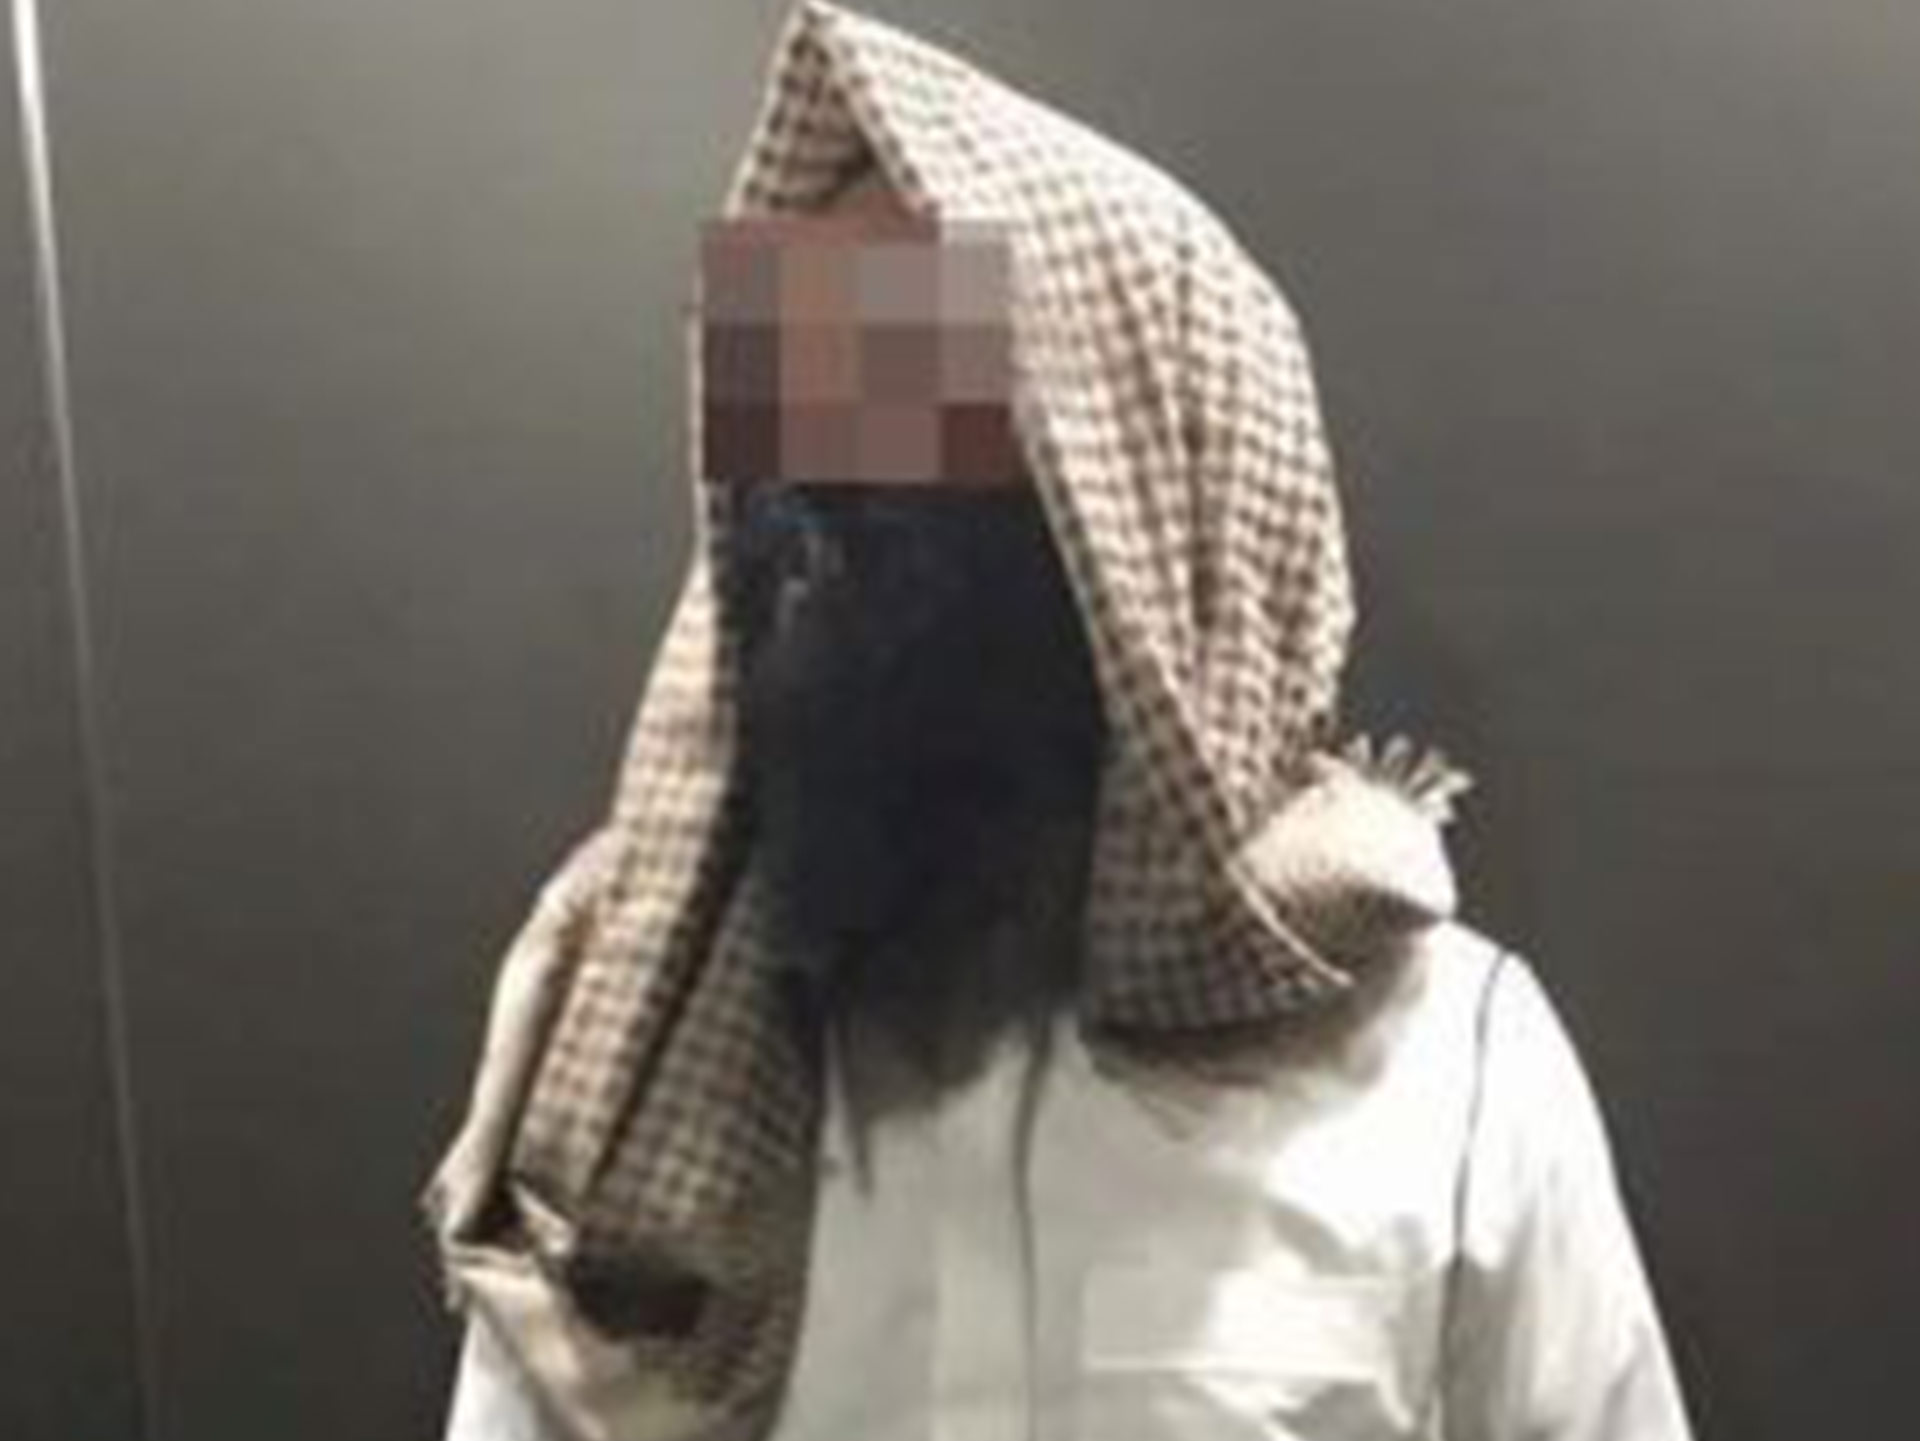 Man arrested after wearing this offensive Halloween costume